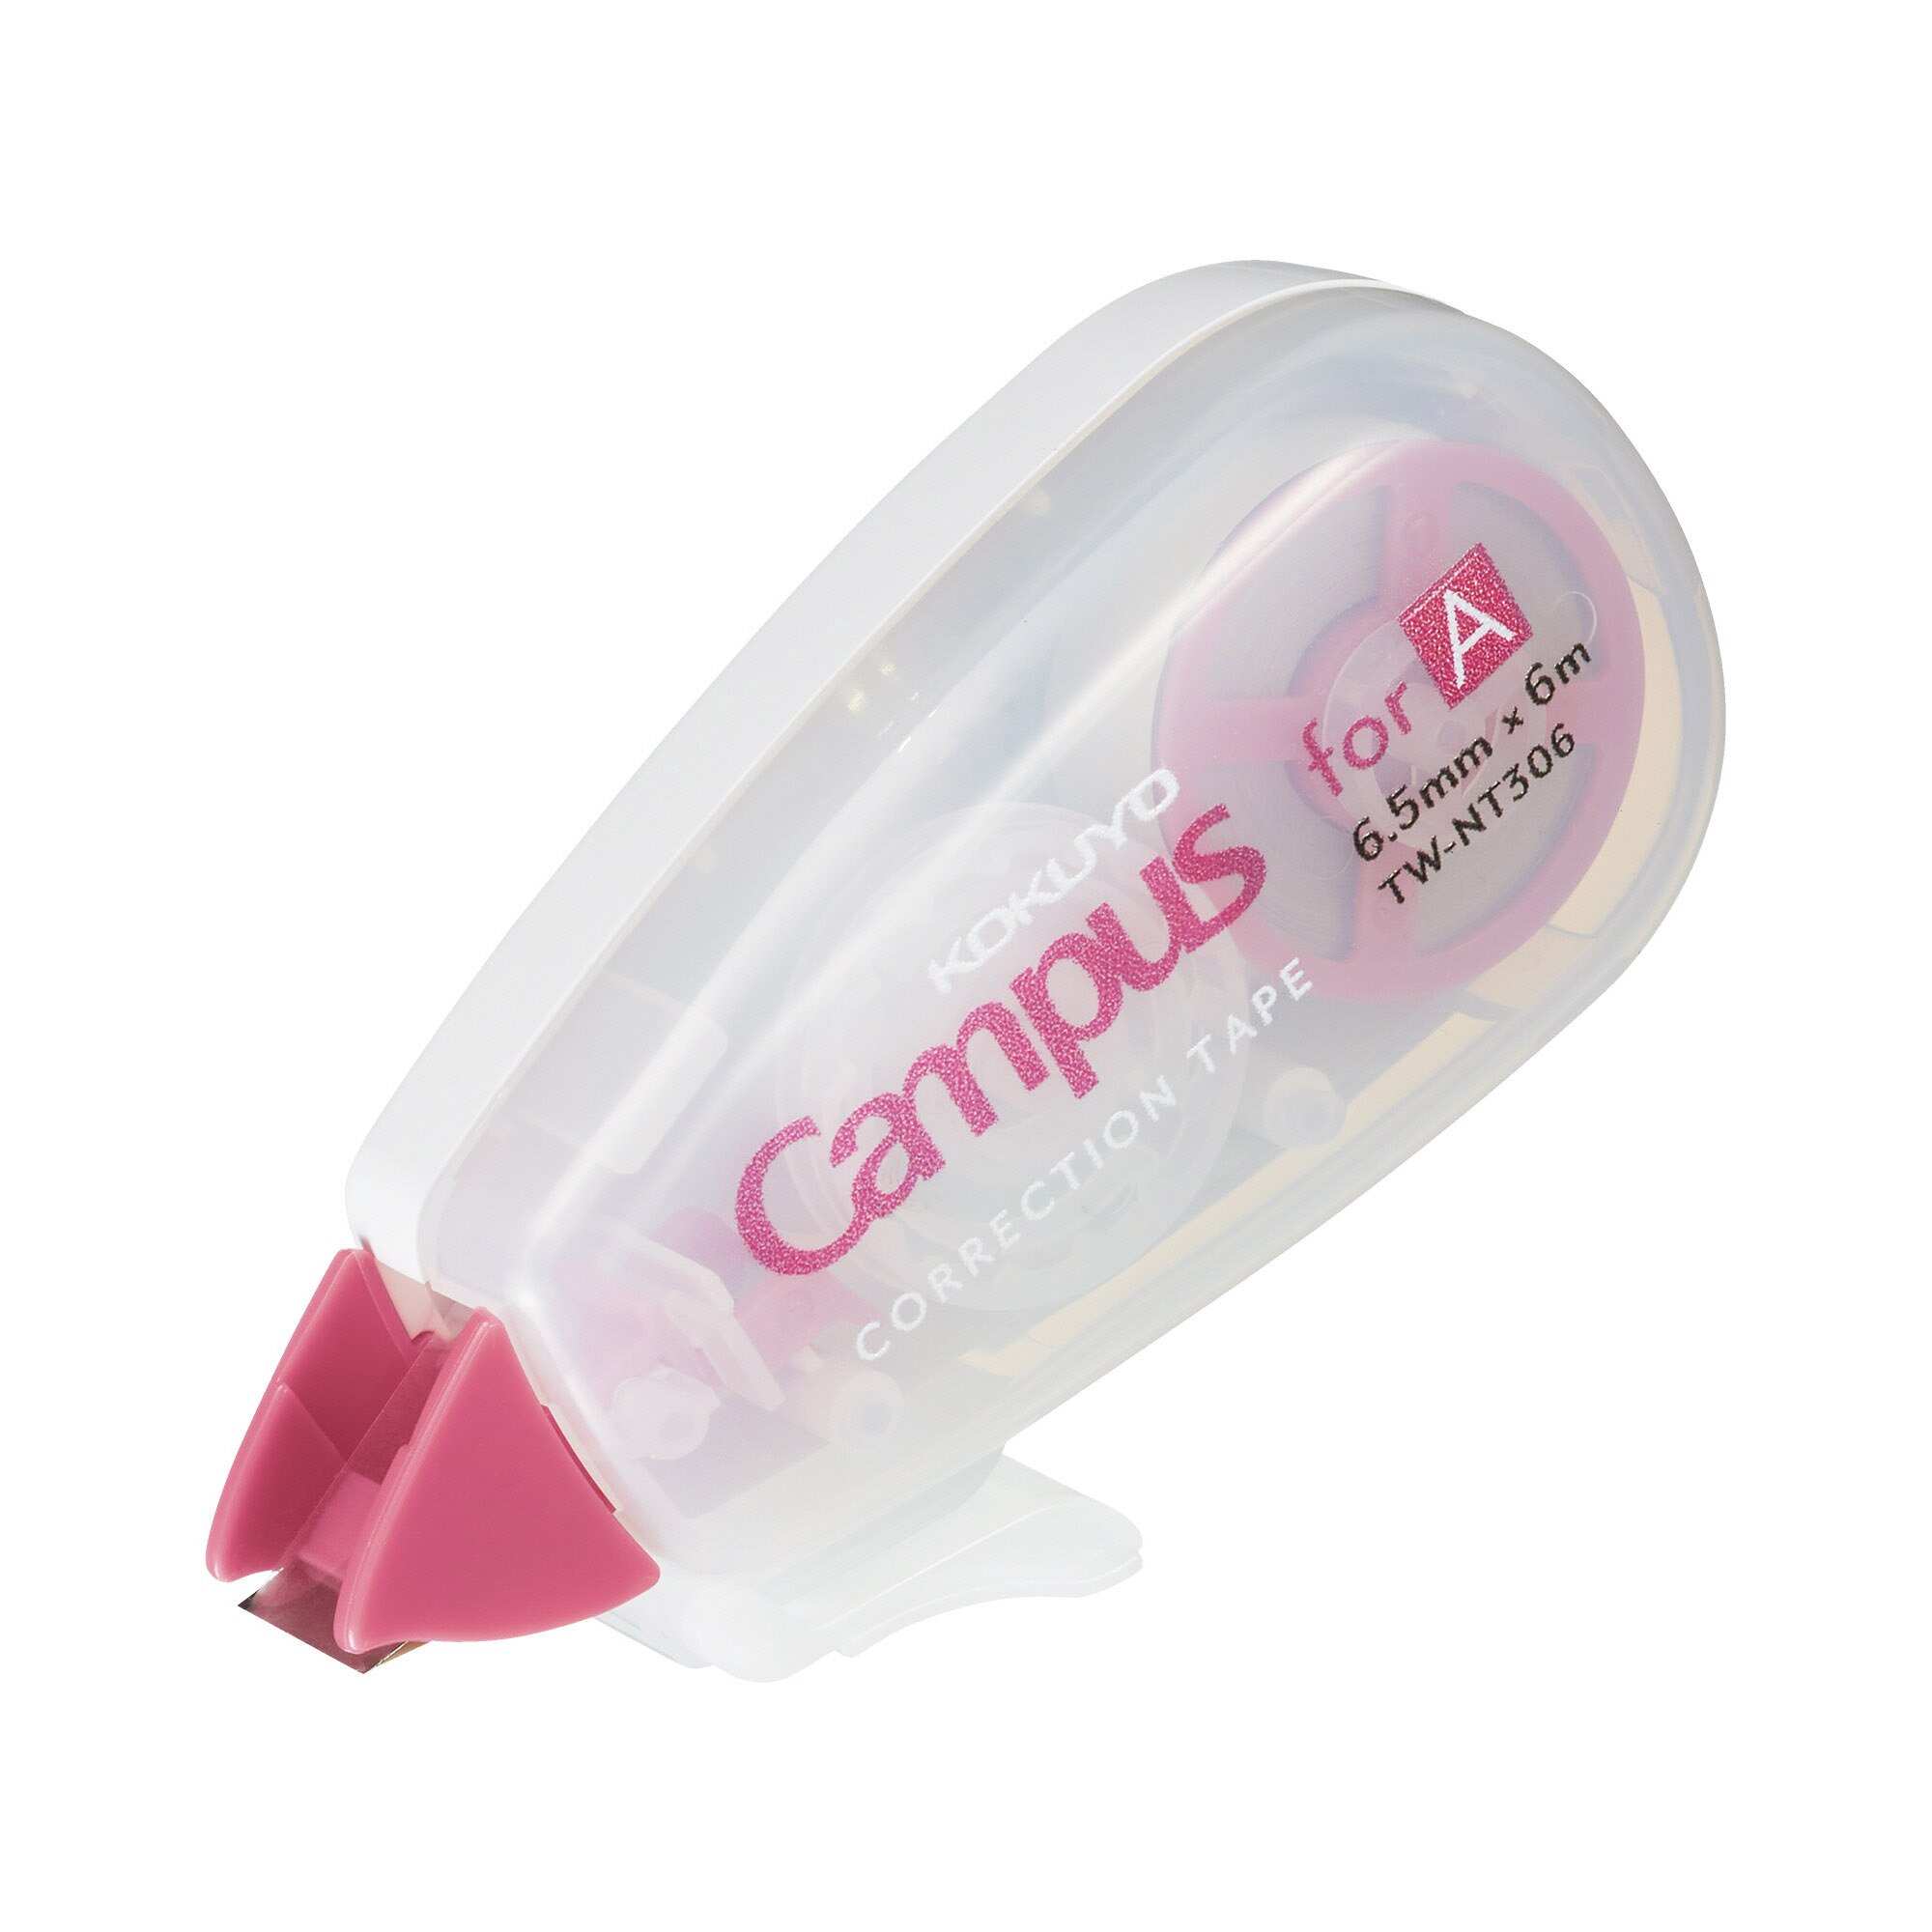 CAMPUS CORRECTION TAPE, 6.5MM WIDTH, 6M OF TAPE